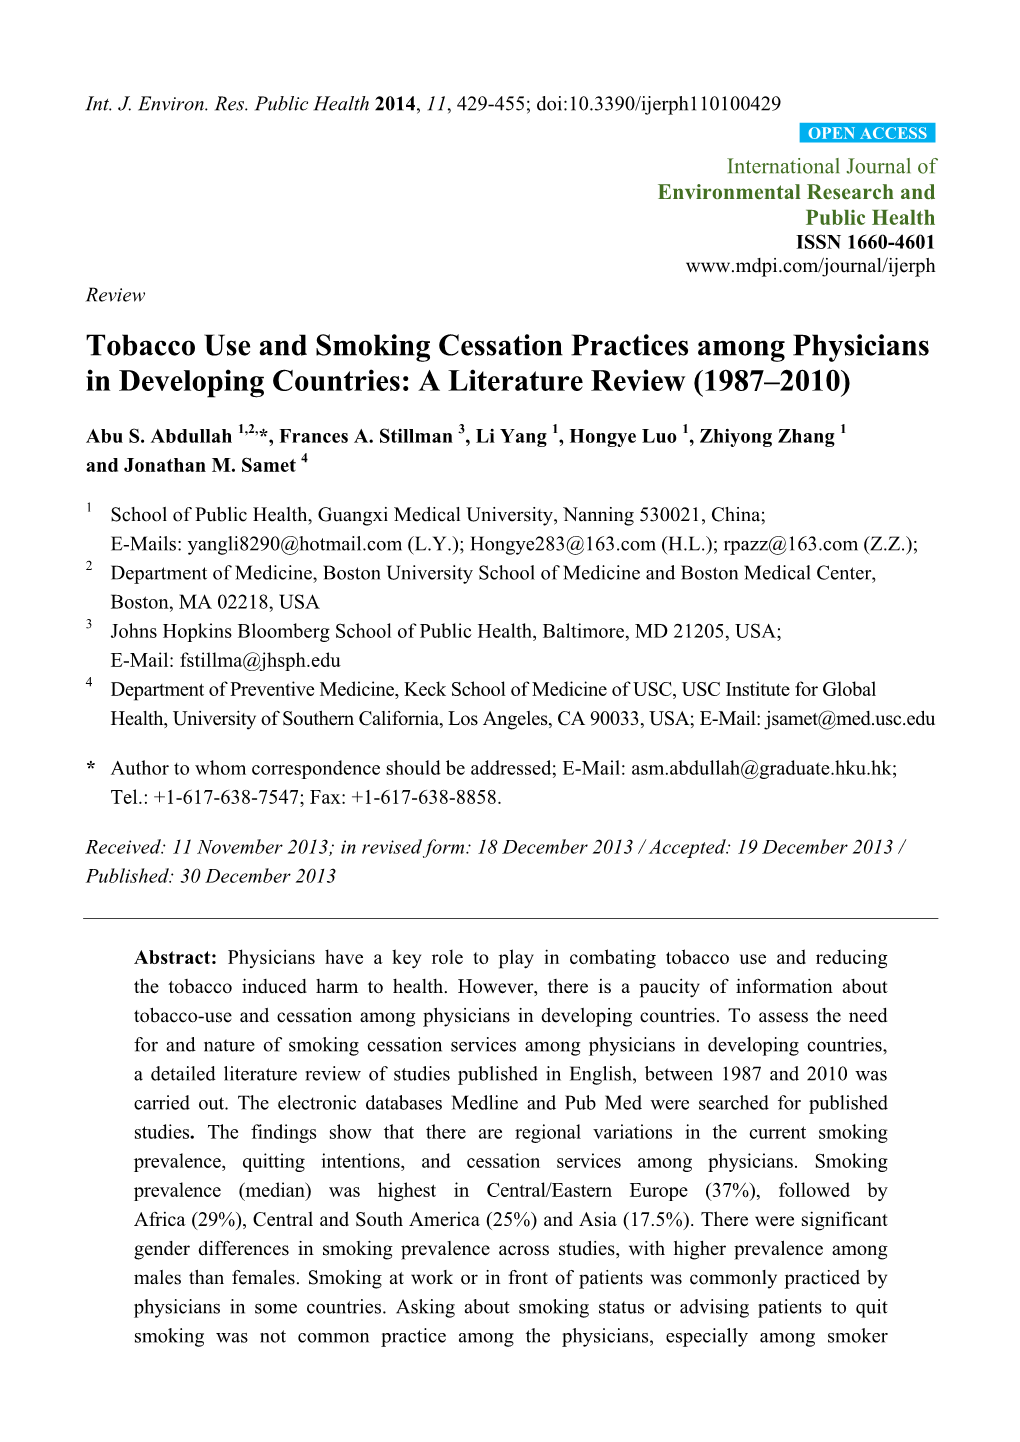 Tobacco Use and Smoking Cessation Practices Among Physicians in Developing Countries: a Literature Review (1987–2010)